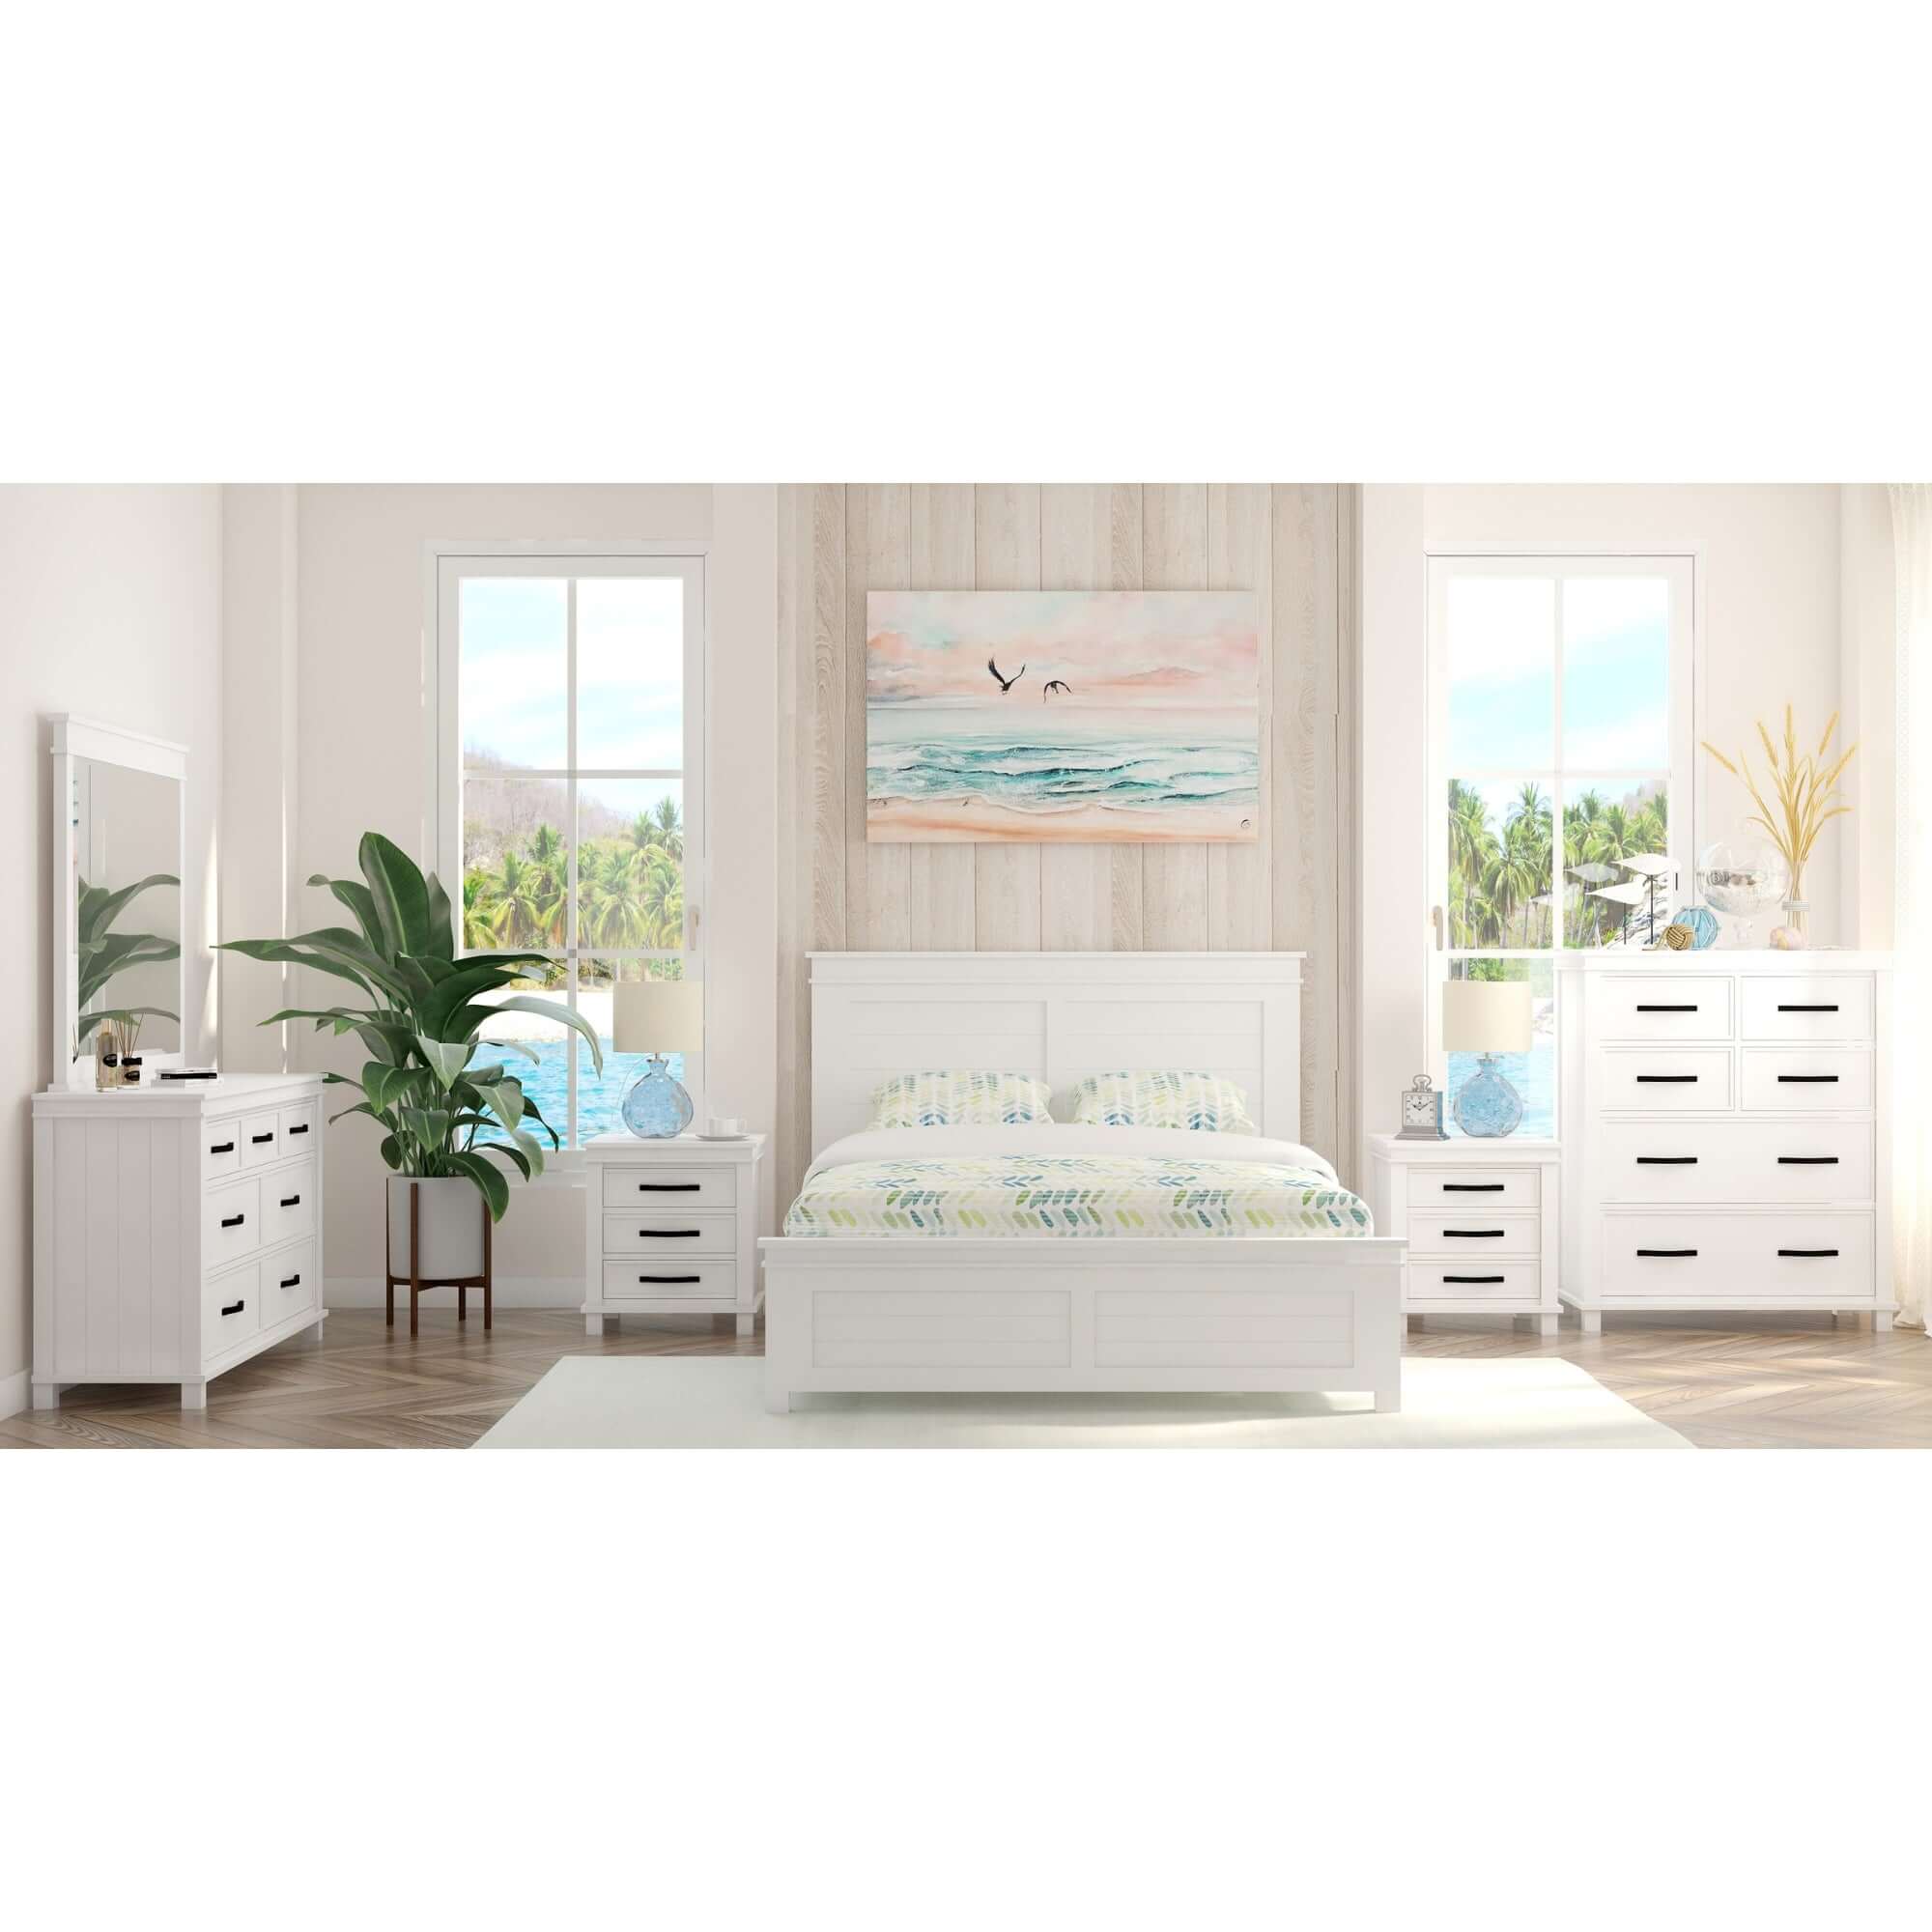 Lily Queen Bedroom Suite - White 4pc Furniture Set-Upinteriors